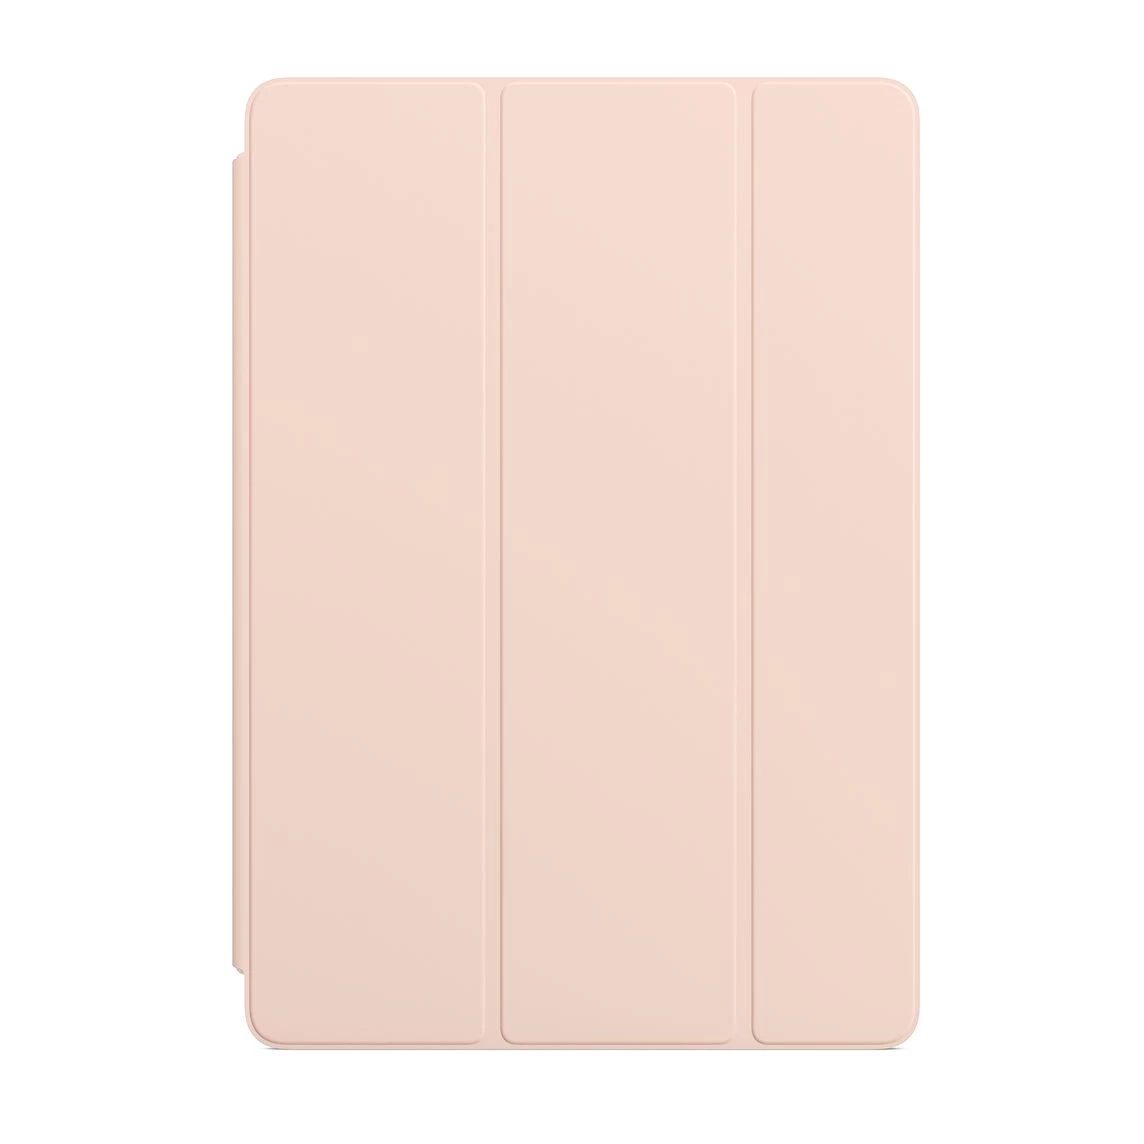 Apple Smart Cover for iPad 10.2" / Air 3 / Pro 10.5" - Pink Sand (MVQ42)